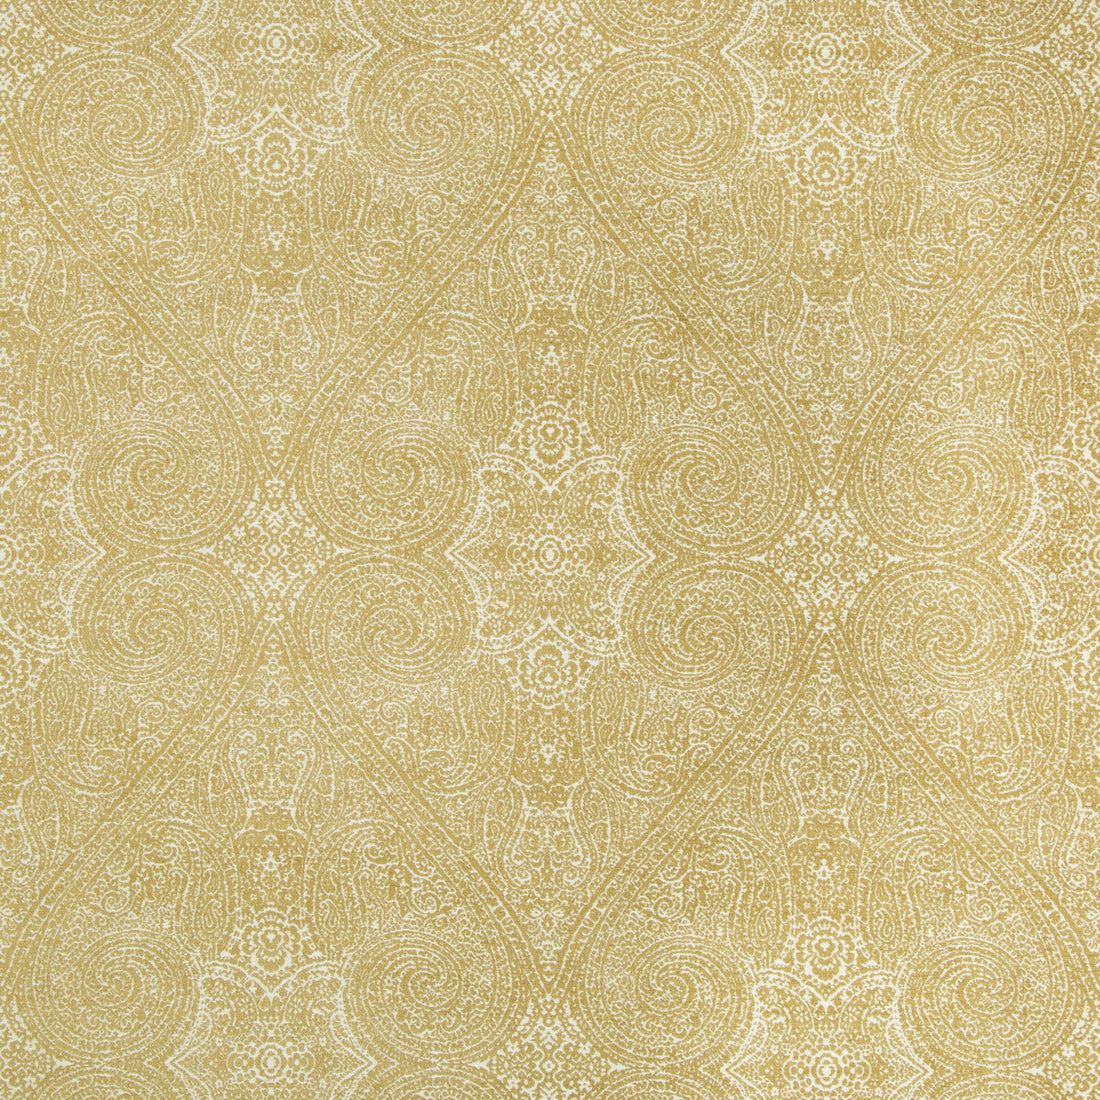 Kravet Contract fabric in 34750-16 color - pattern 34750.16.0 - by Kravet Contract in the Gis collection